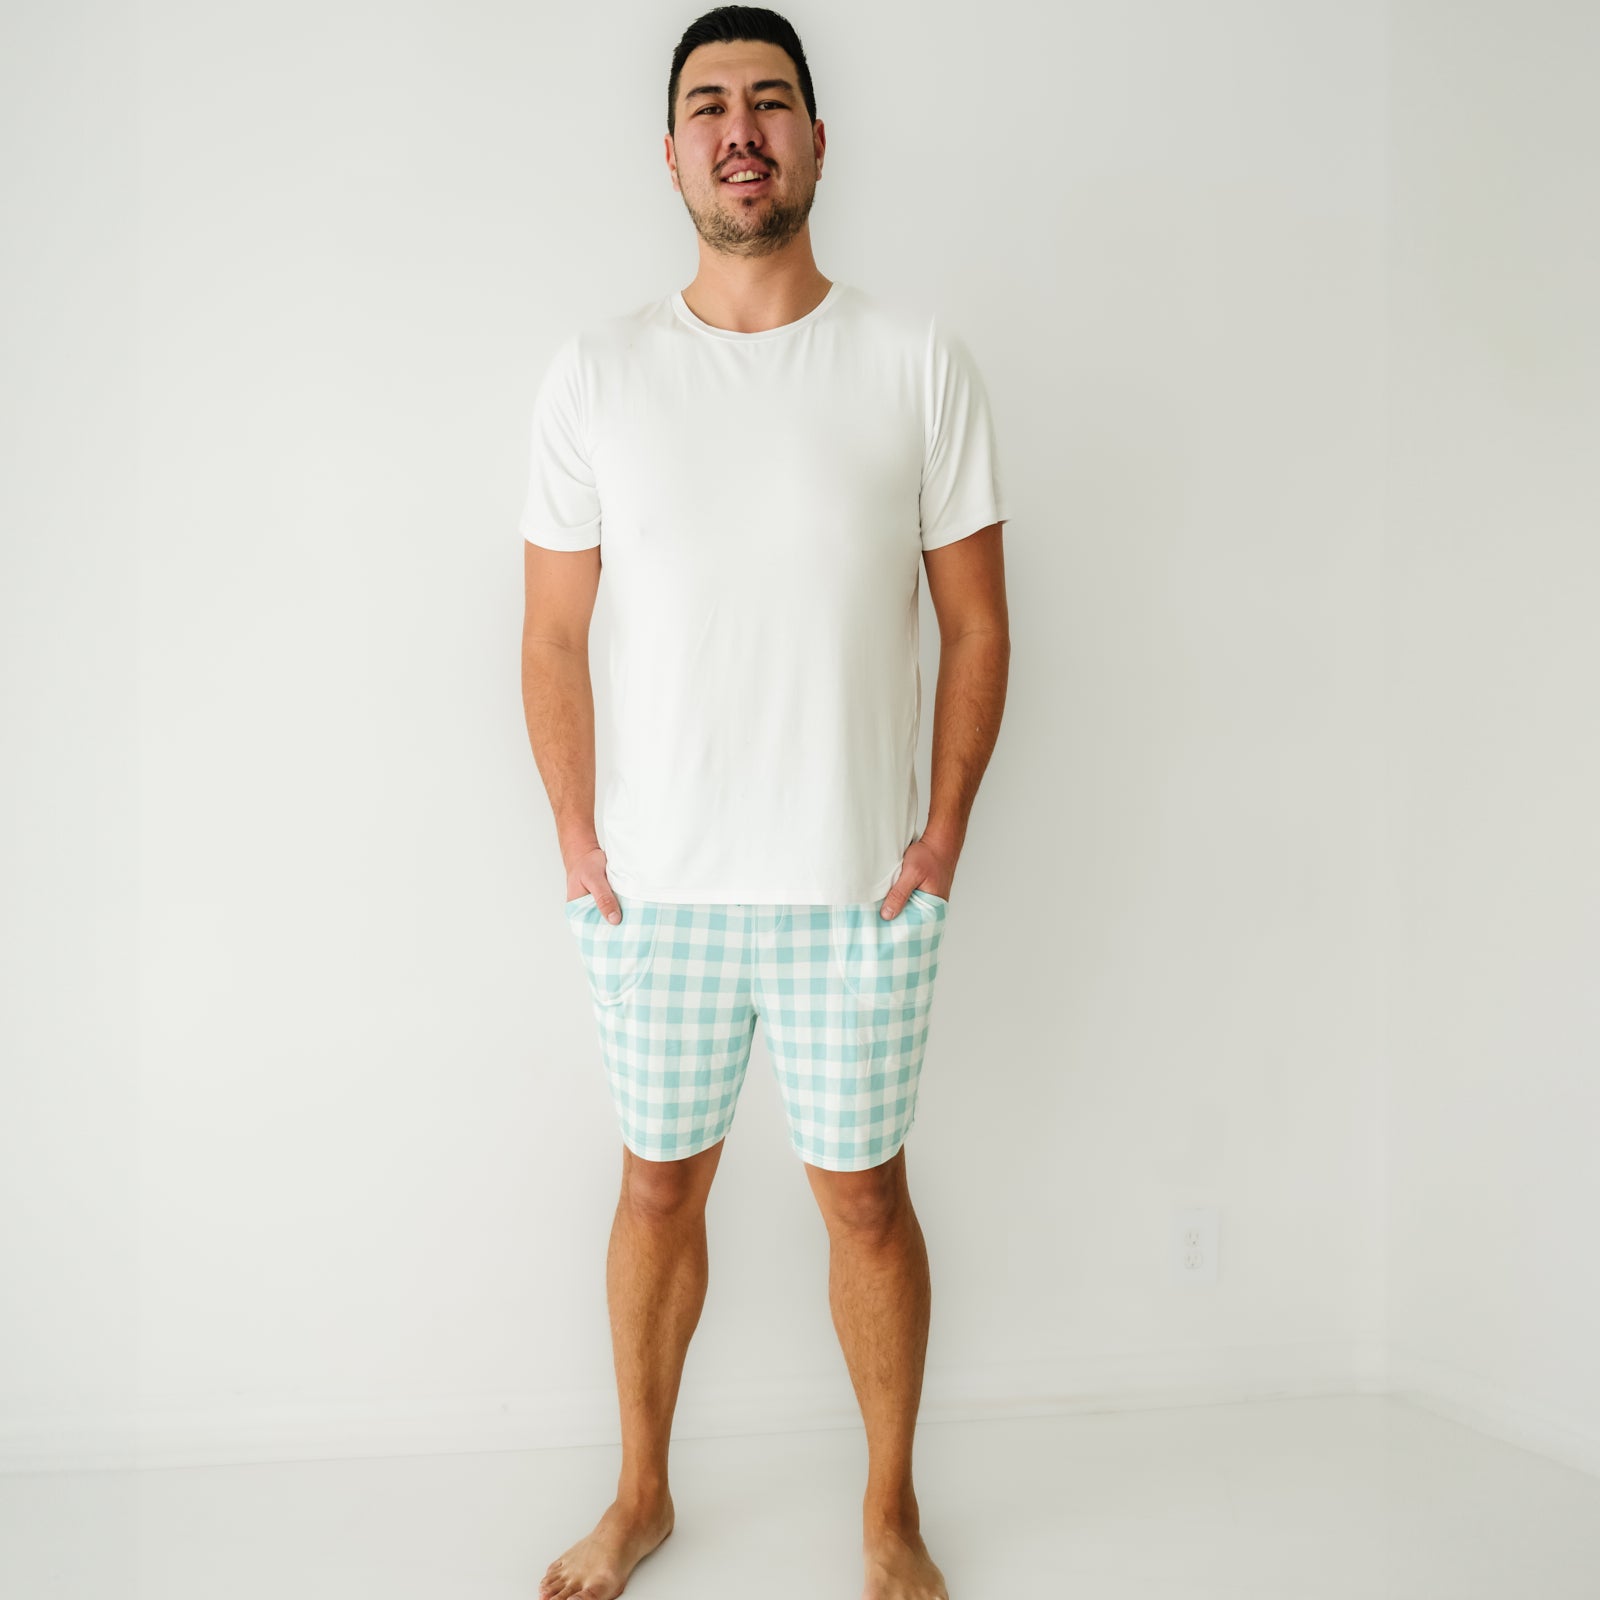 Man wearing Aqua Gingham men's pajama shorts paired with a men's Bright White short sleeve pajama top